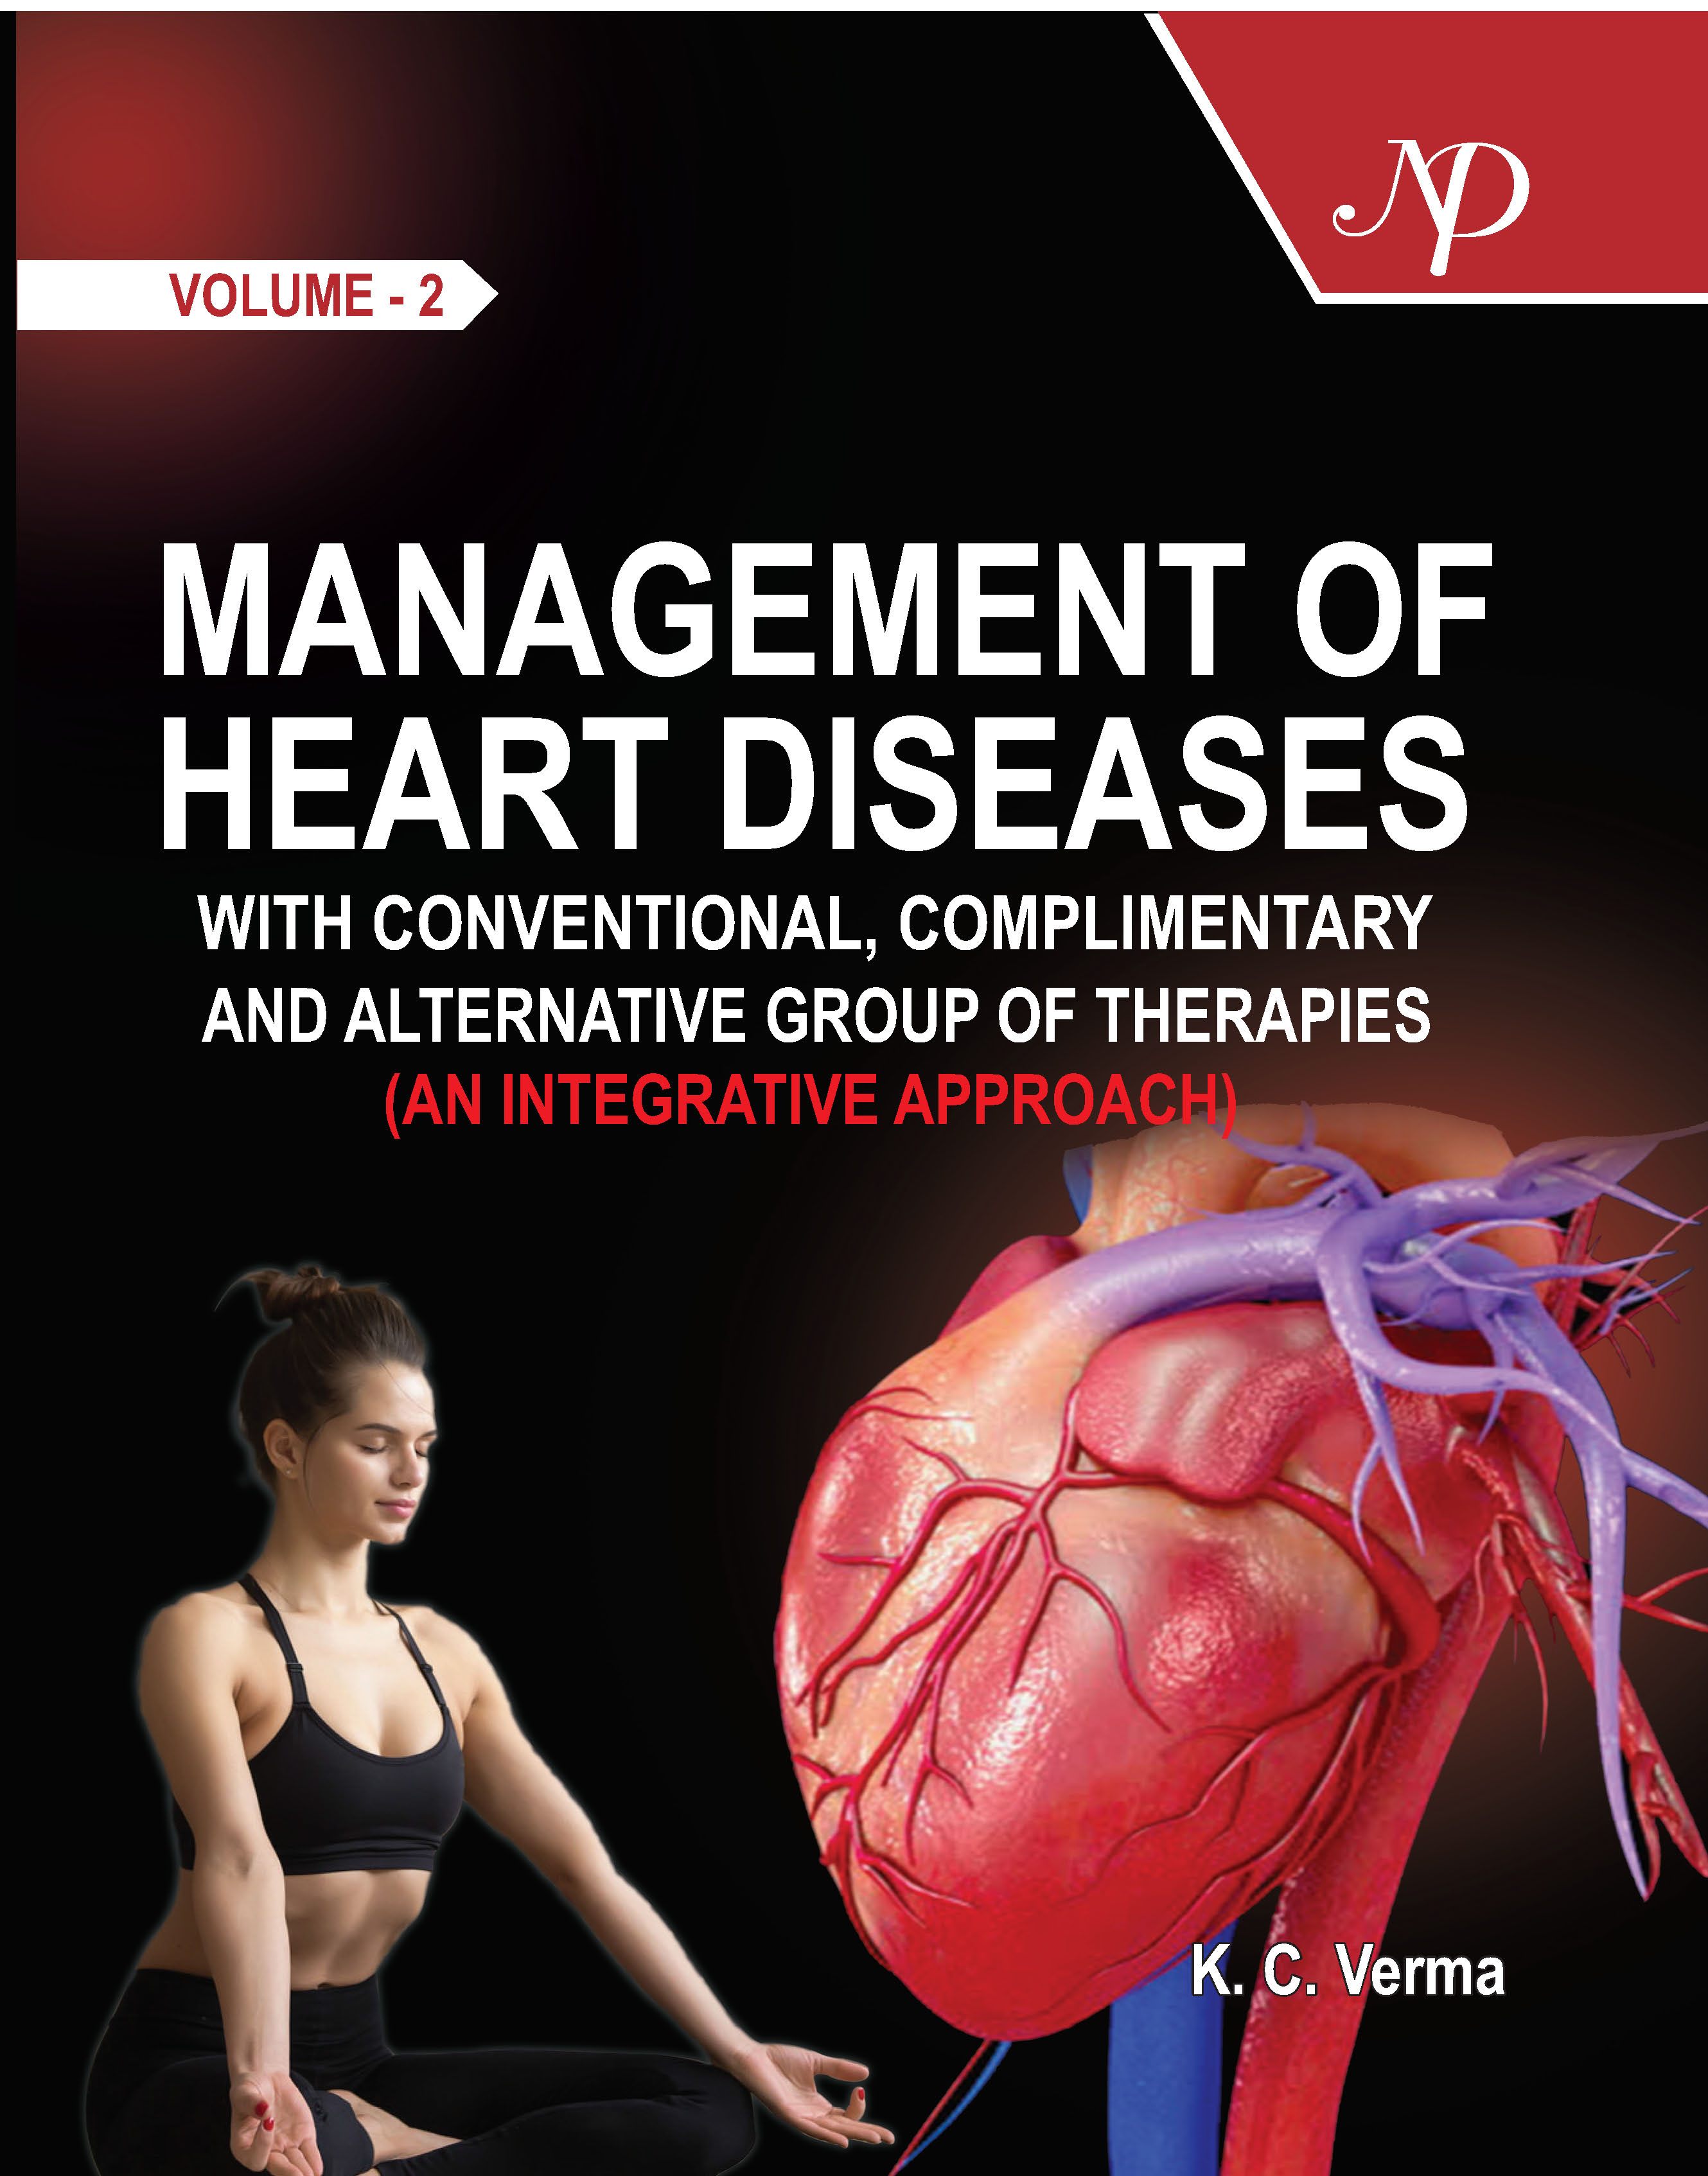 Management of Heart Diseases with Conventional, Complimentary and Alternative Group of Therapies (An Integrative Approach) Vol. 2